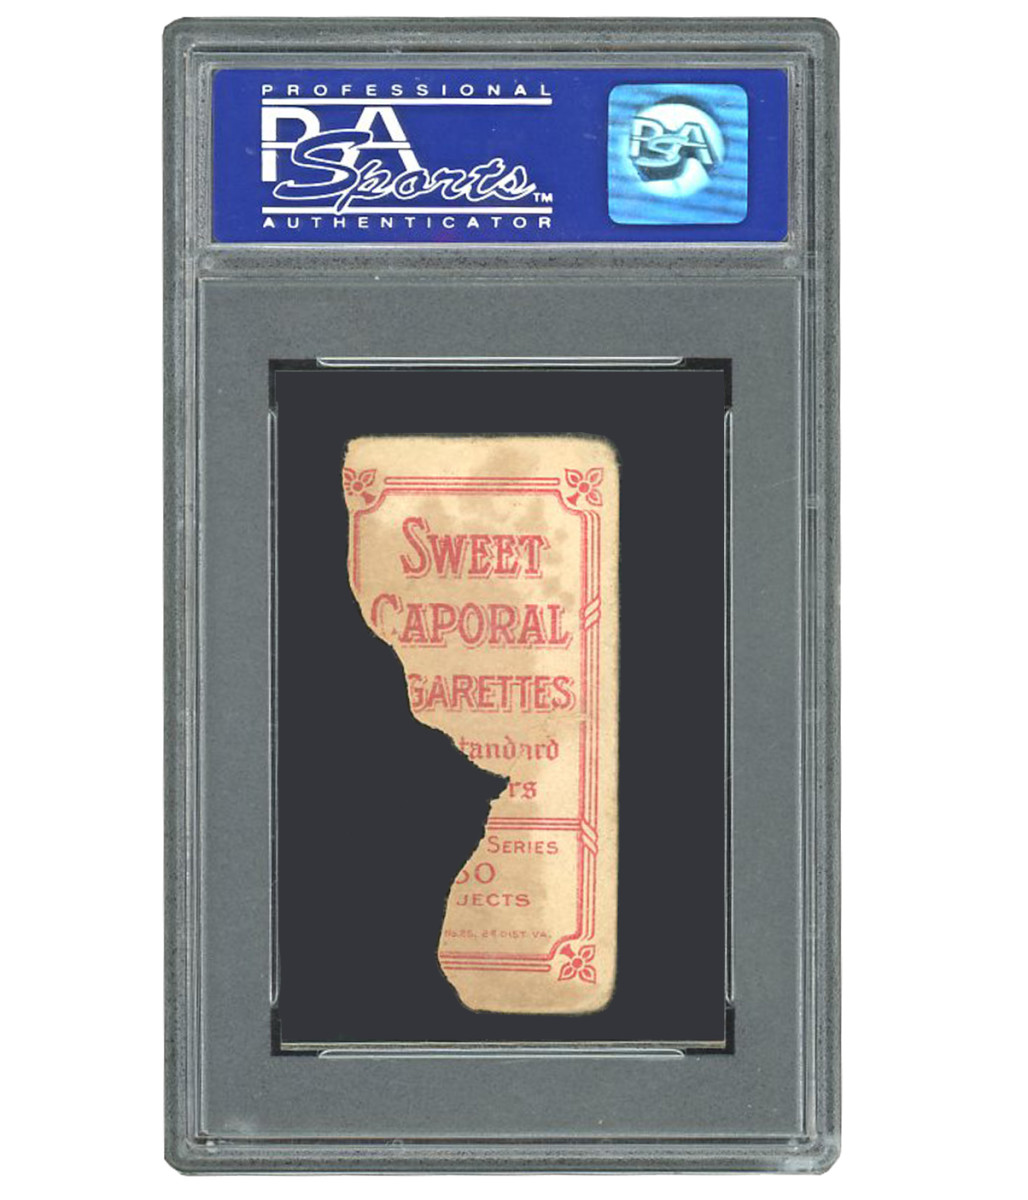 The back of a T206 Honus Wager card that is torn almost in half is up for auction at SCP Auctions.